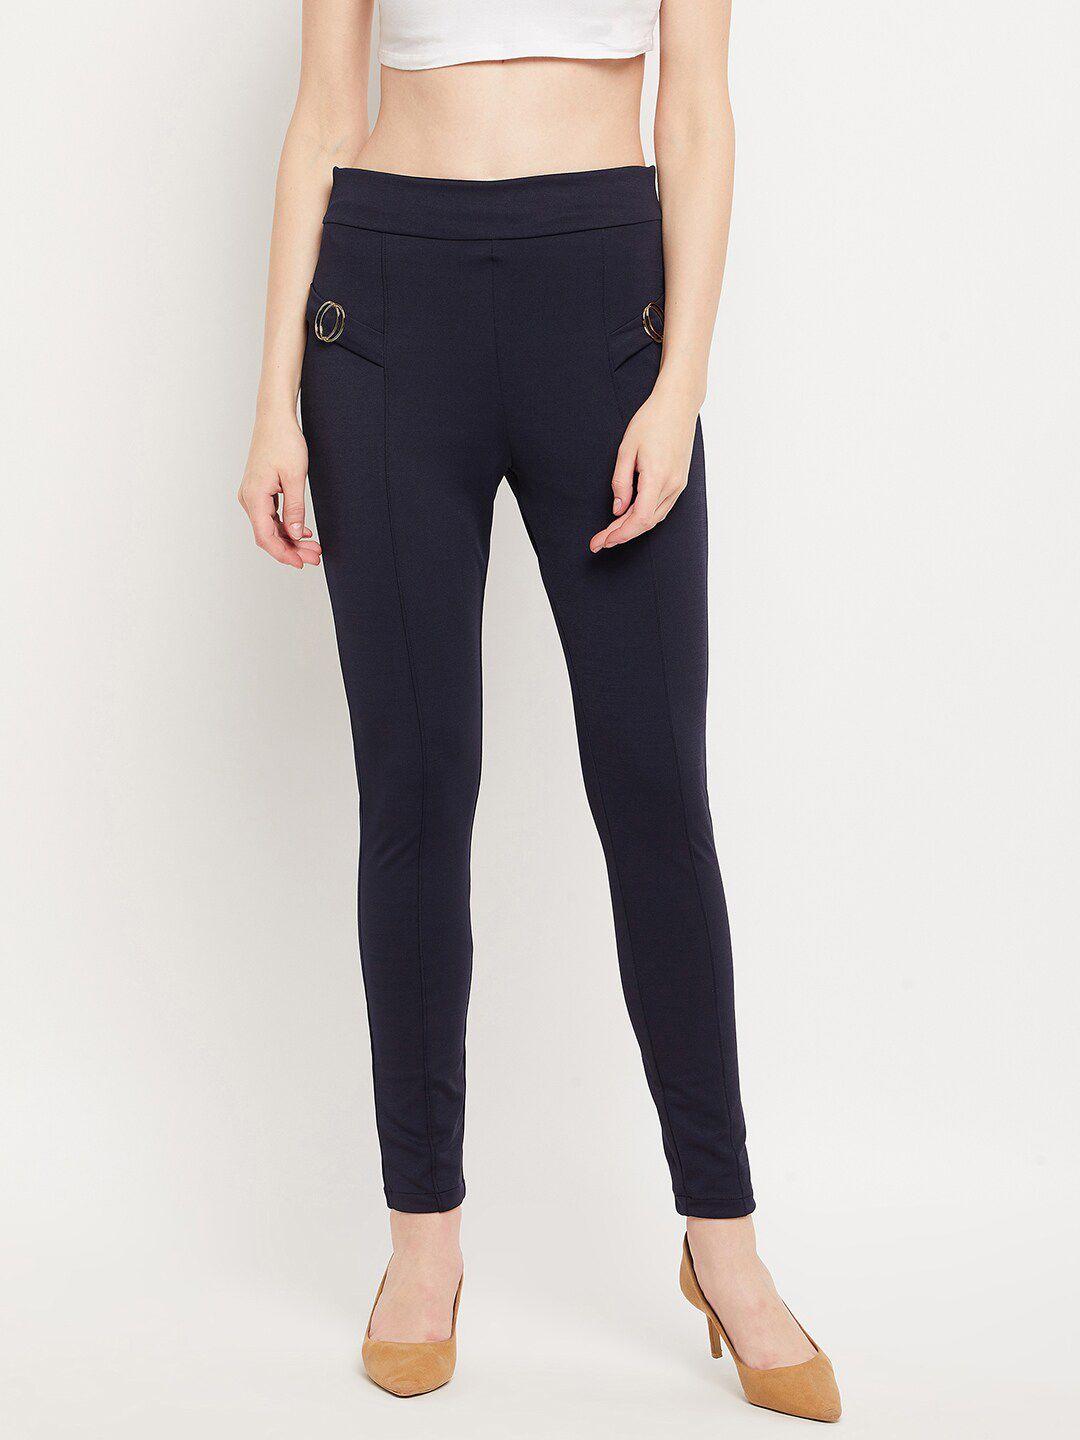 clora-creation-women-navy-blue-solid-jeggings